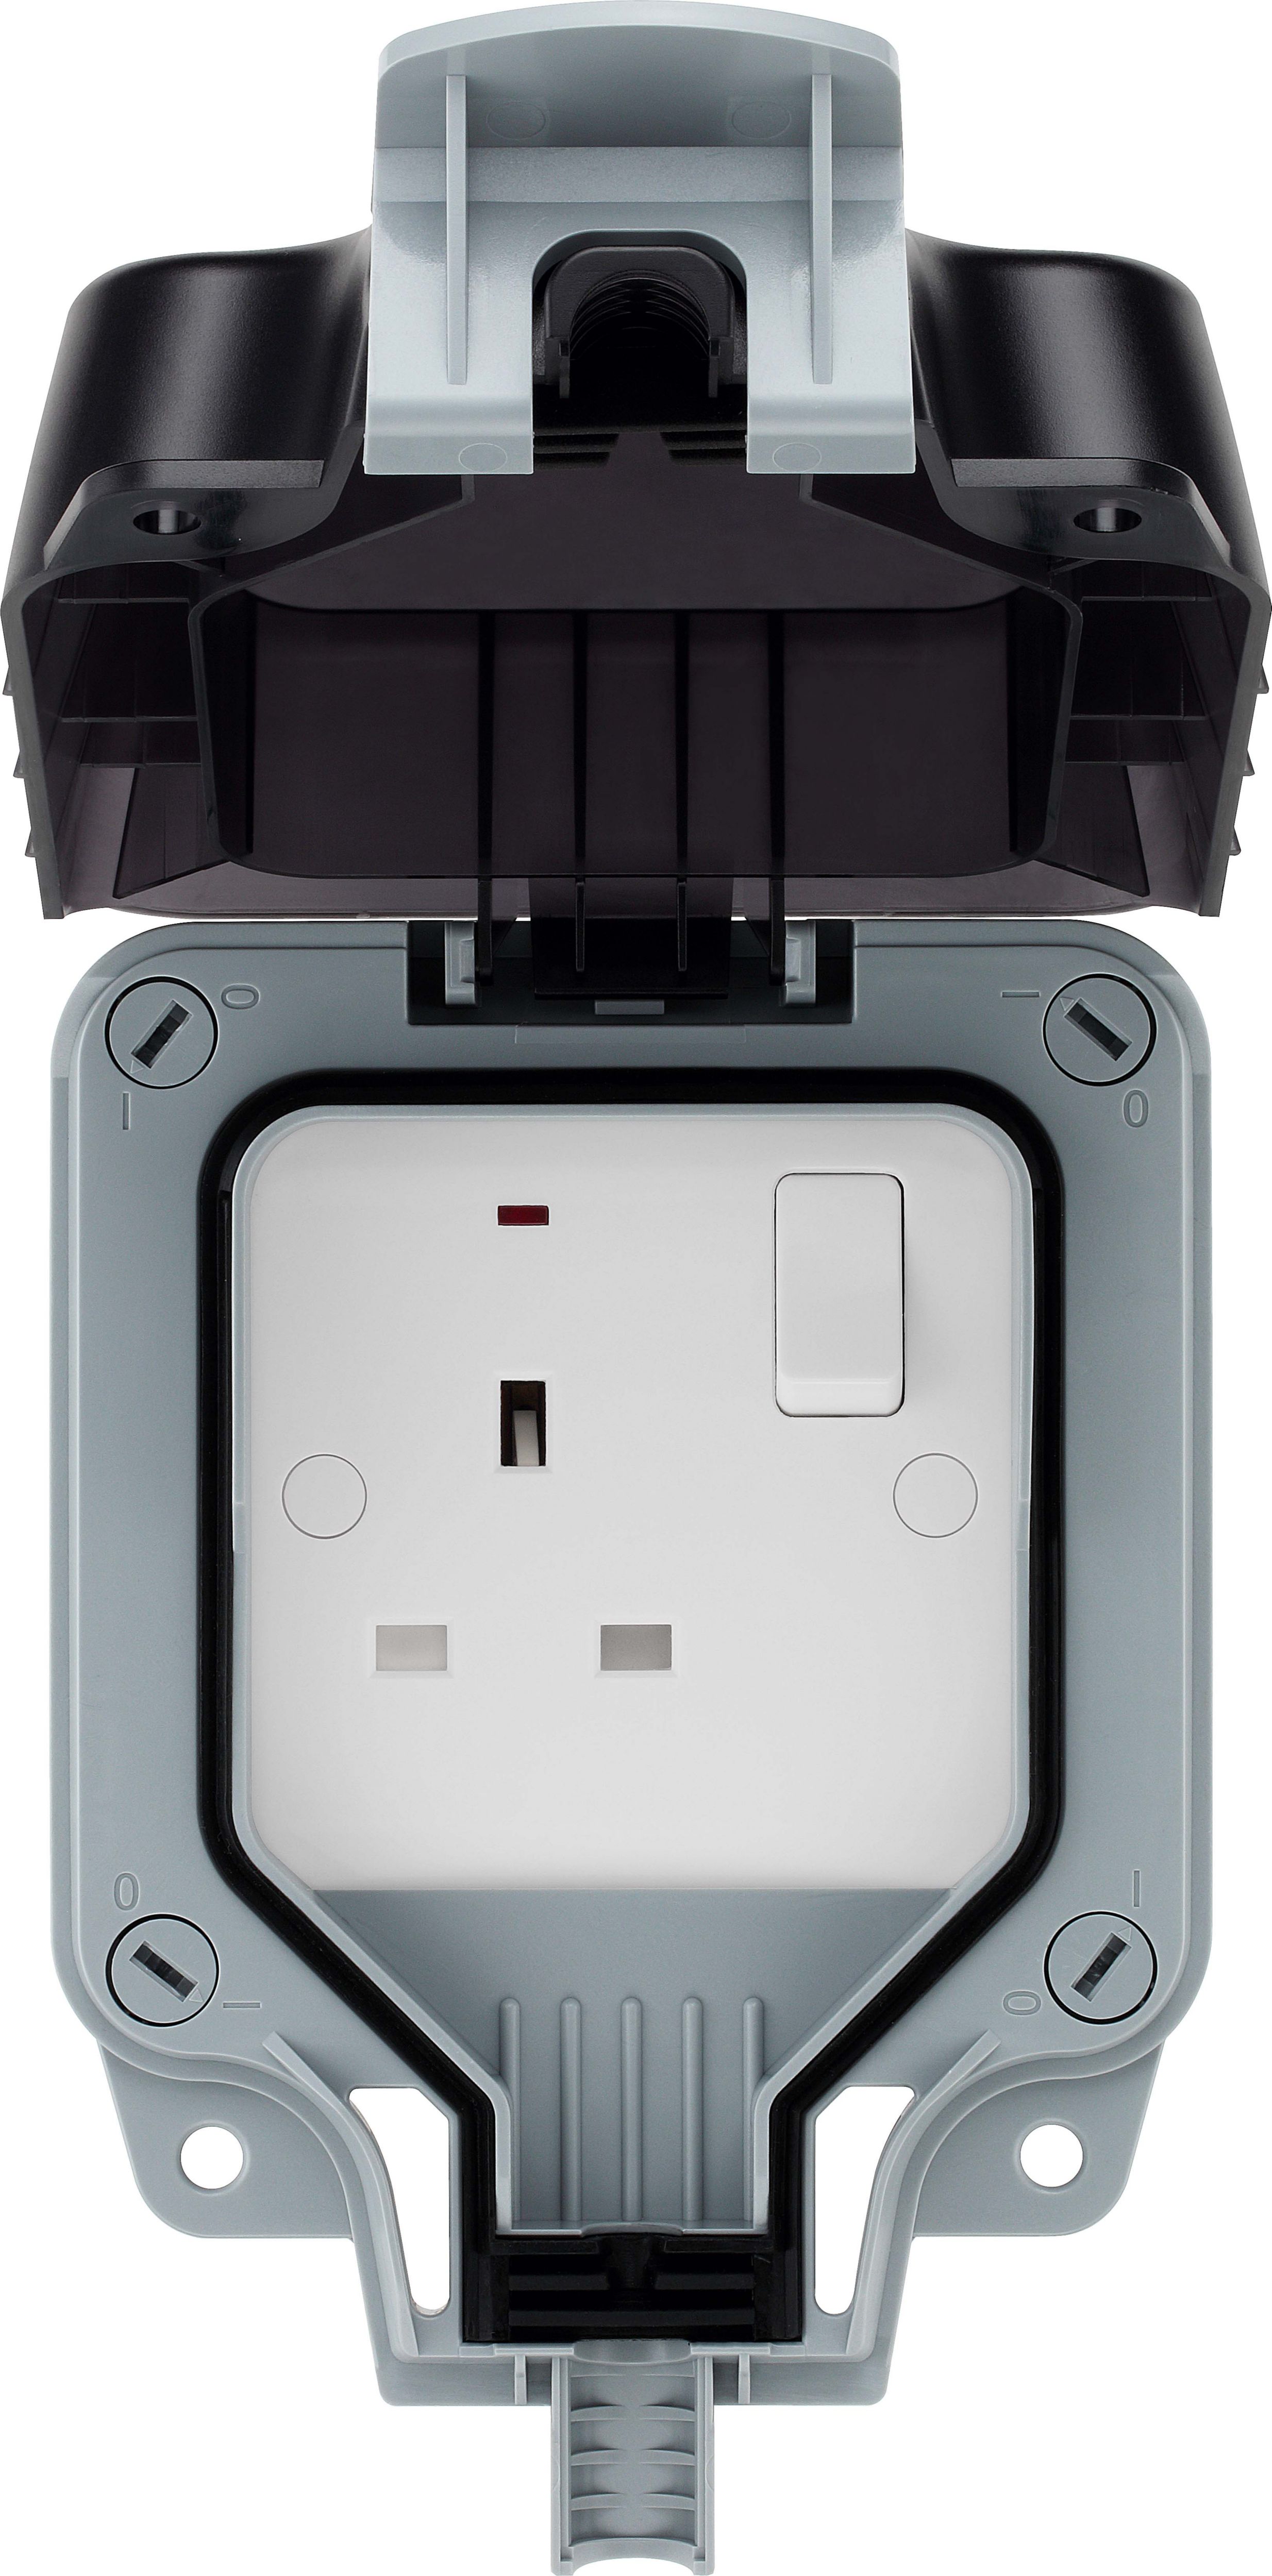 BG 13A Grey 1 gang Outdoor Weatherproof switched socket